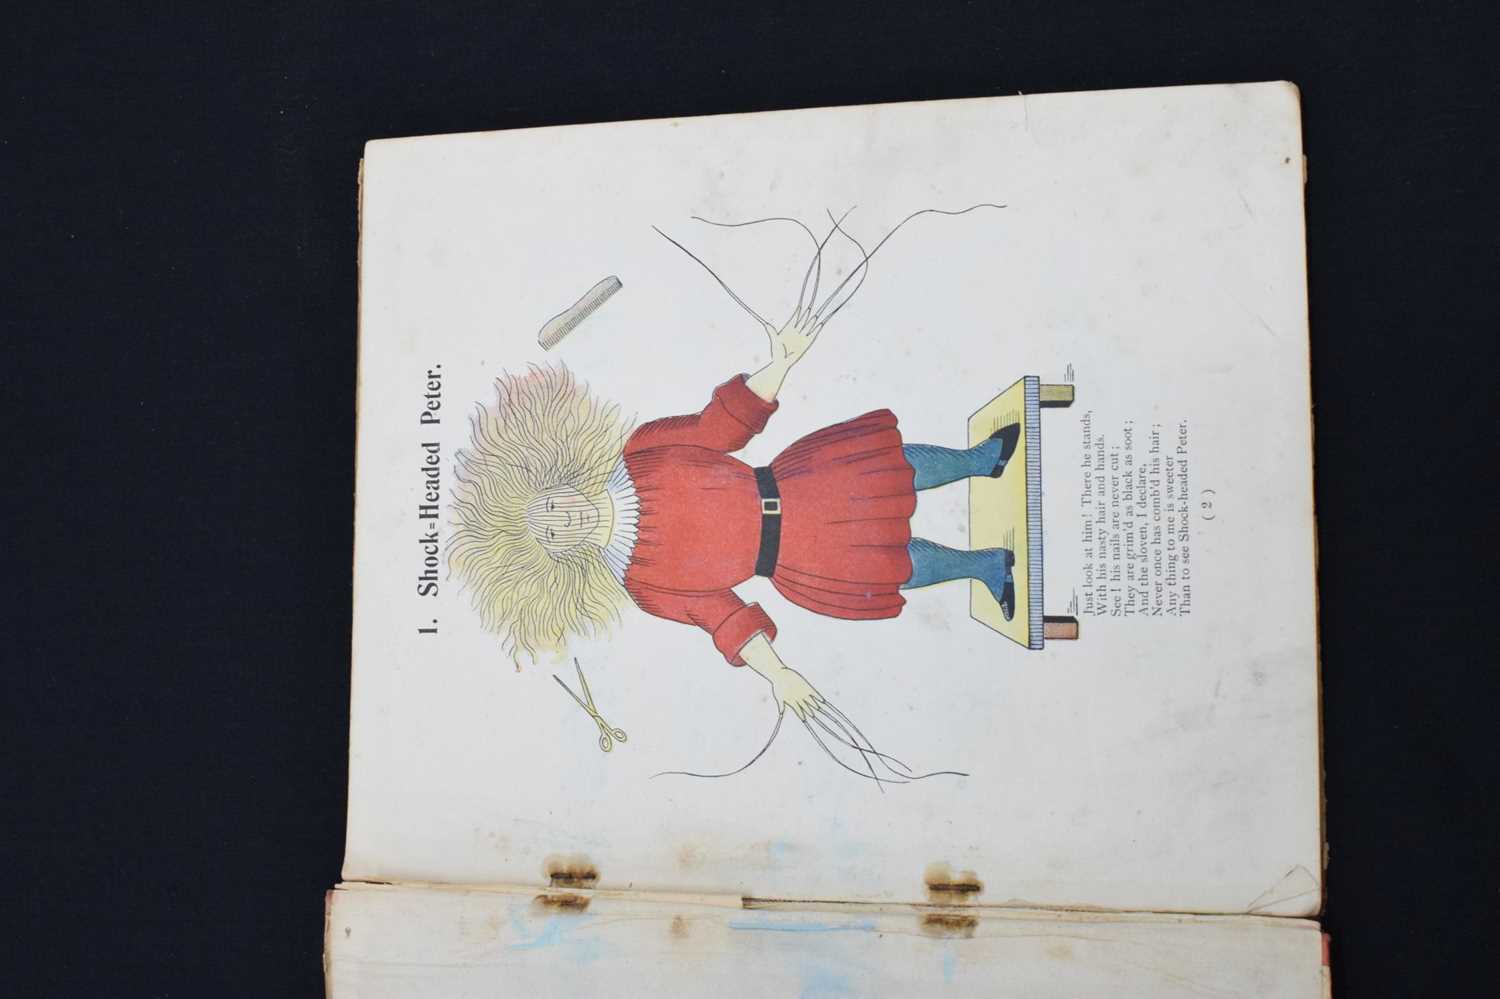 'Der Struwwelpeter' by Dr Heinrich Hoffman, German and English editions - Image 10 of 12